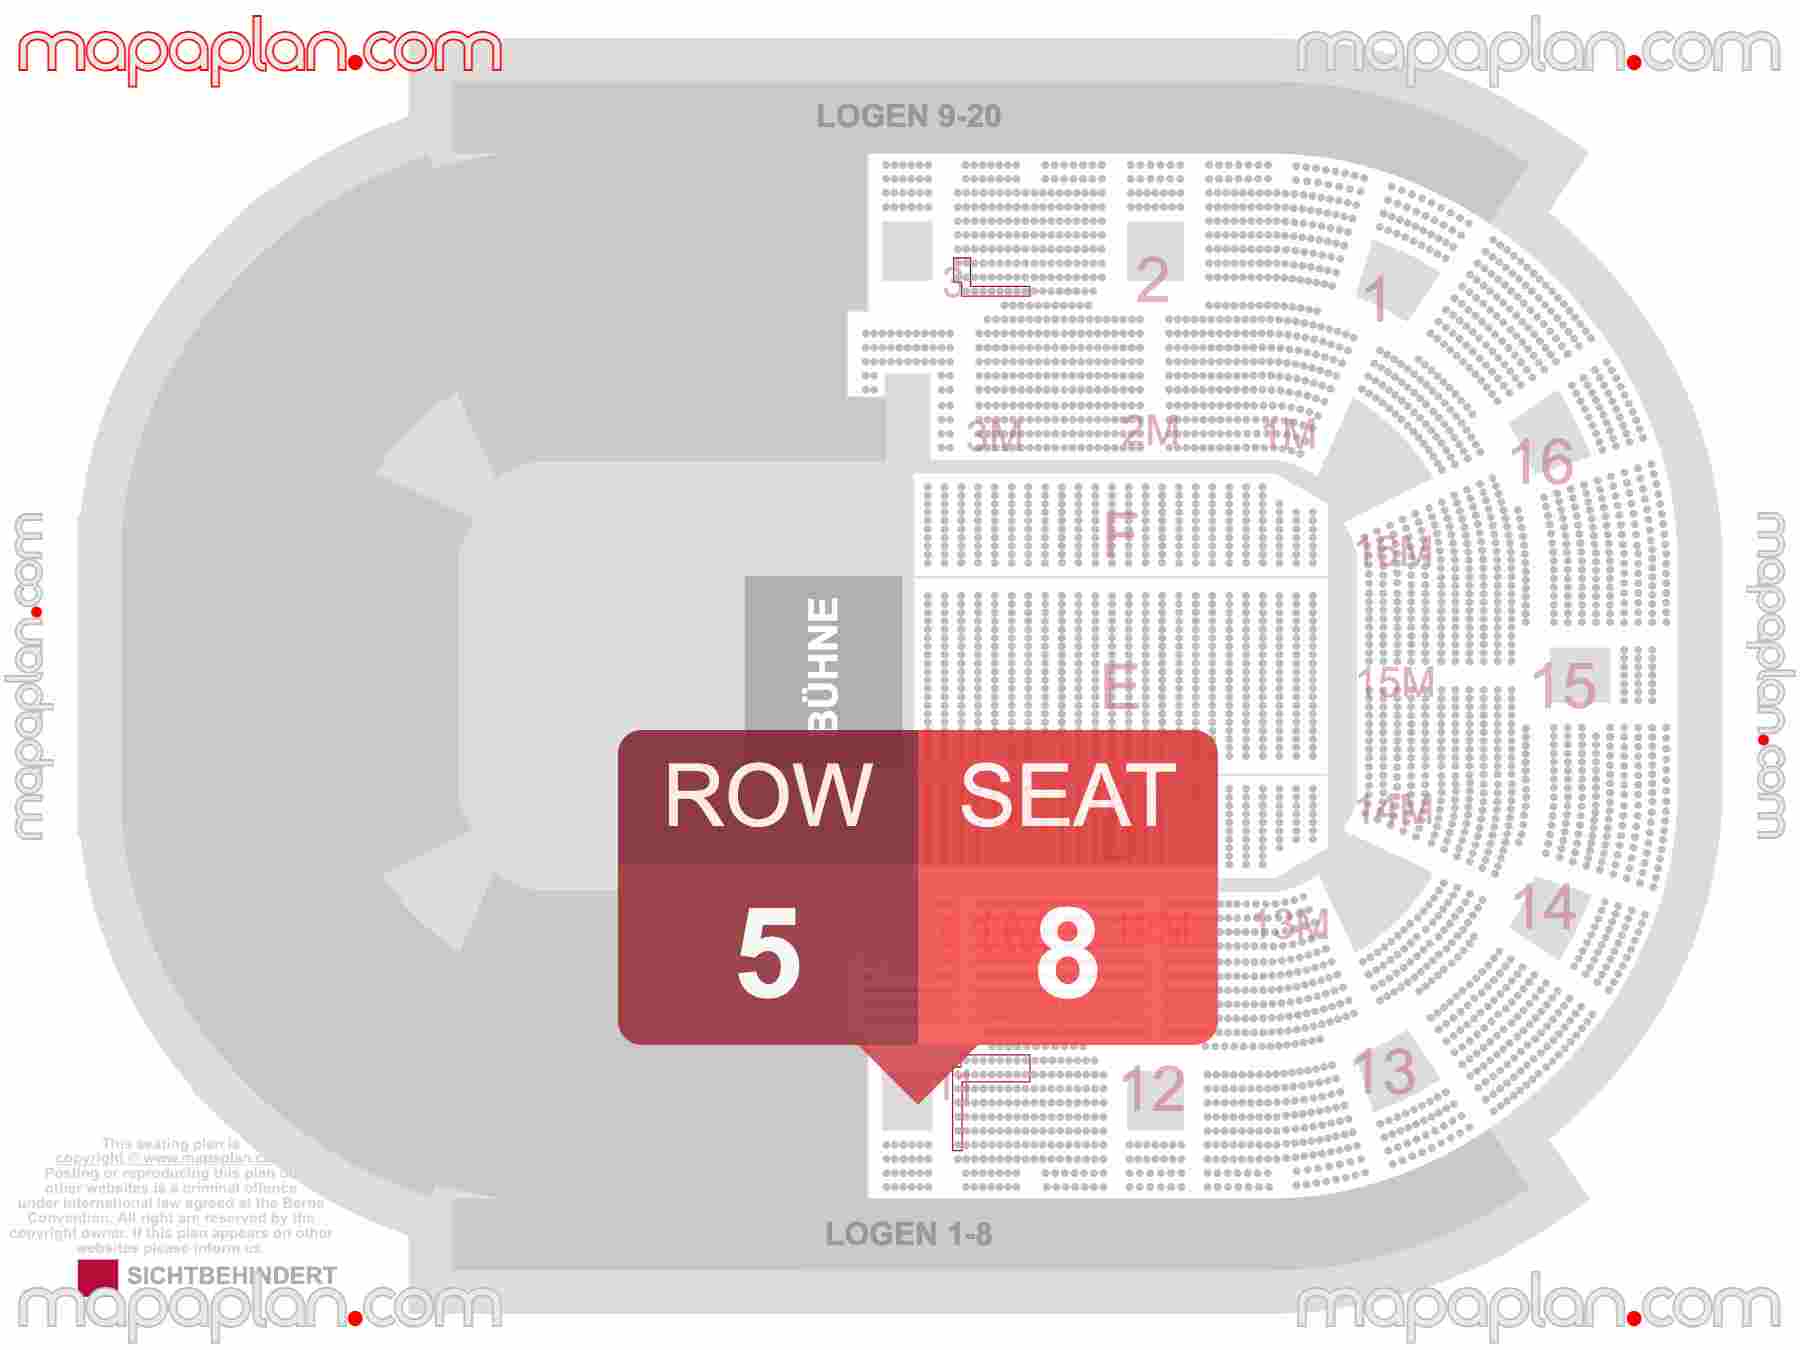 Stuttgart Porsche Arena seating plan Concerts Sitzplan mit Block und Platz nummerierung seating plan with exact section numbers showing best rows and seats selection 3d layout - Best interactive seat finder tool with precise detailed location data